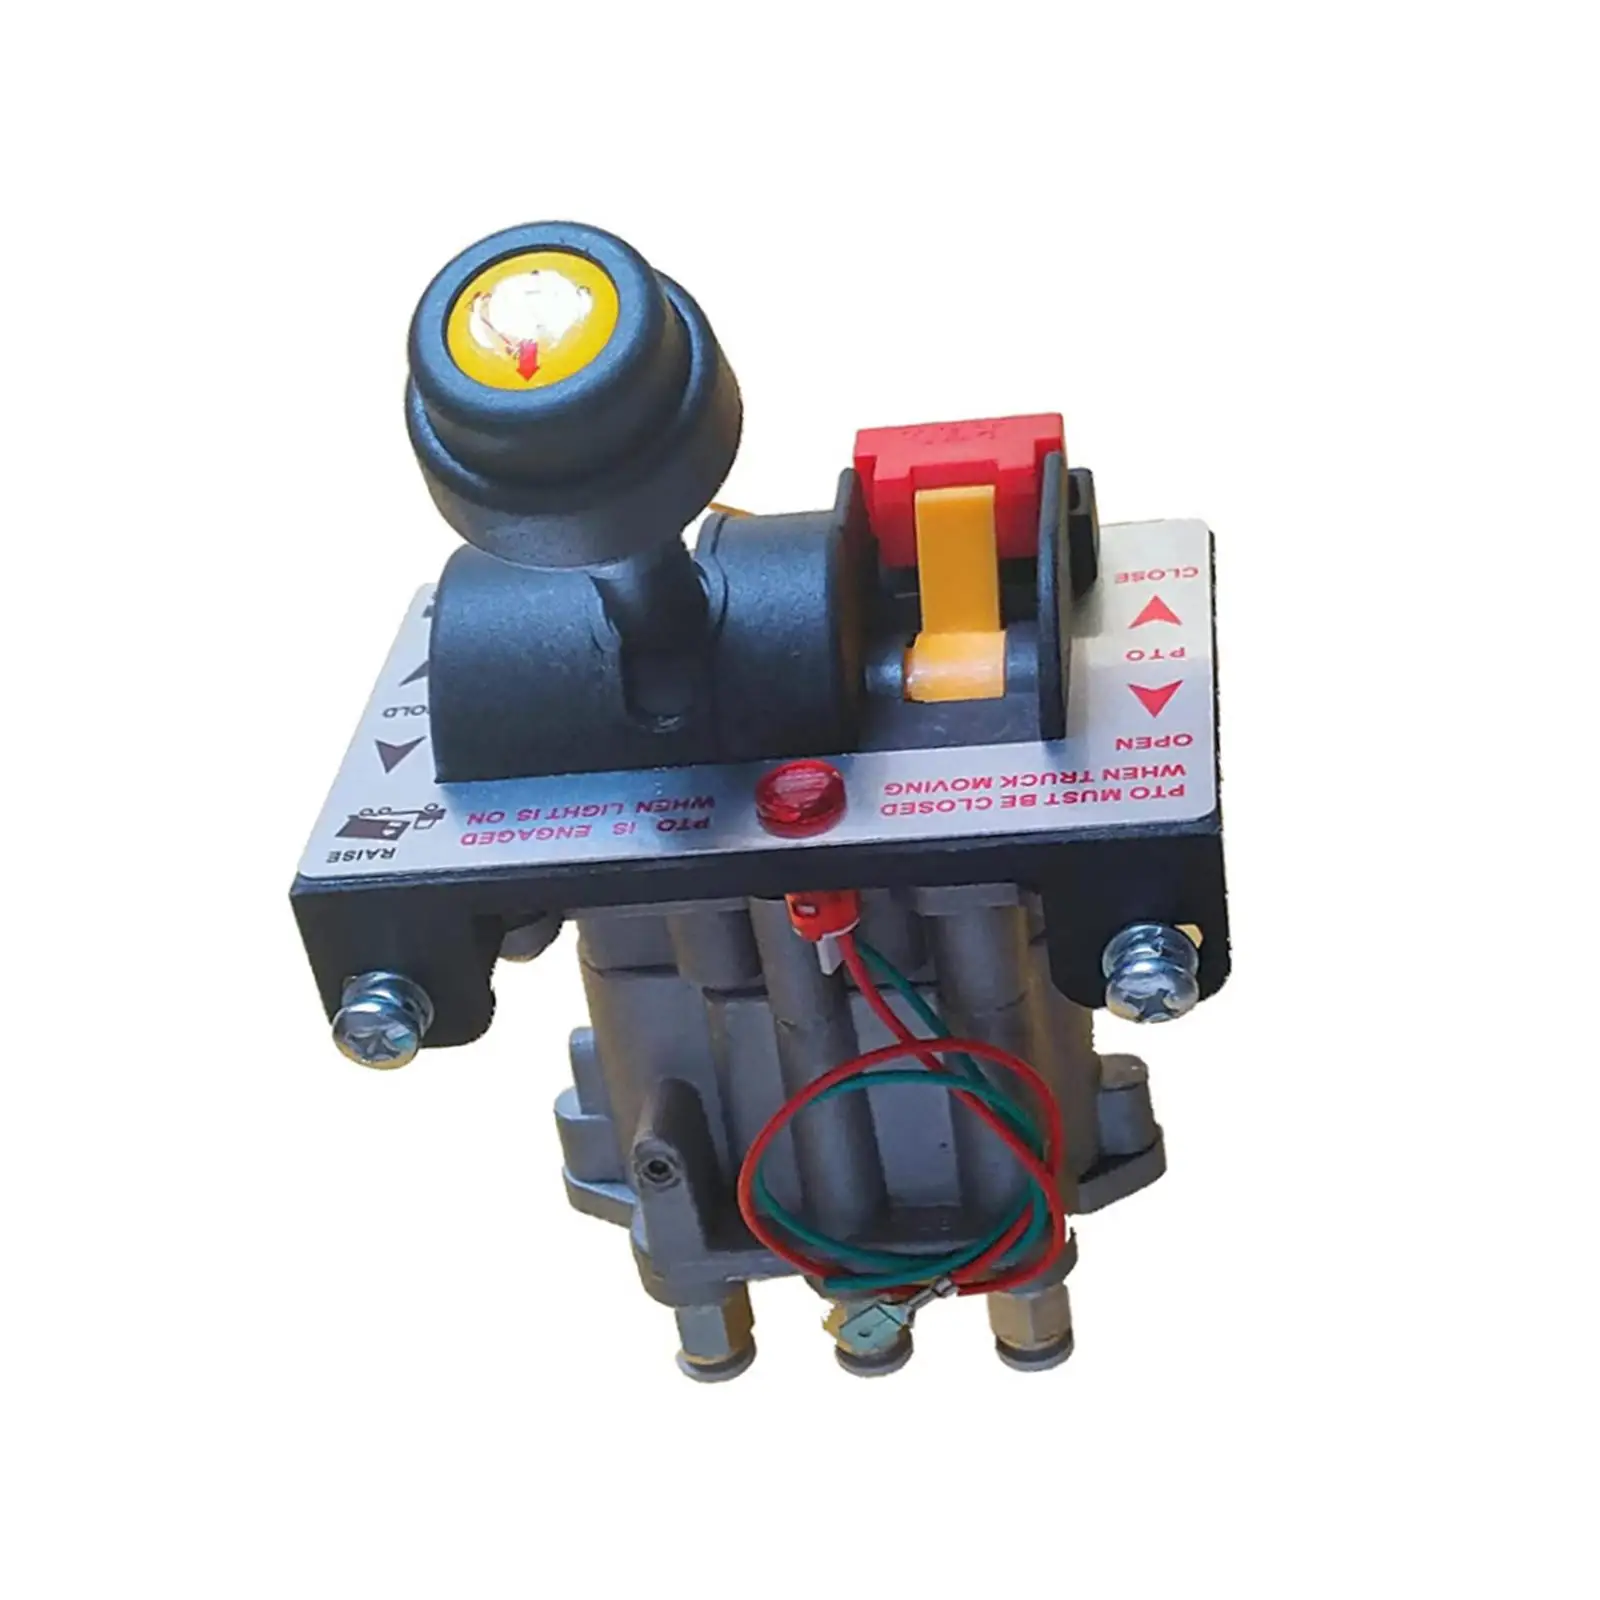 hydraulic-system-lift-switch-truck-tipper-hydraulic-system-easy-to-install-replacements-proportional-control-valve-for-car-truck